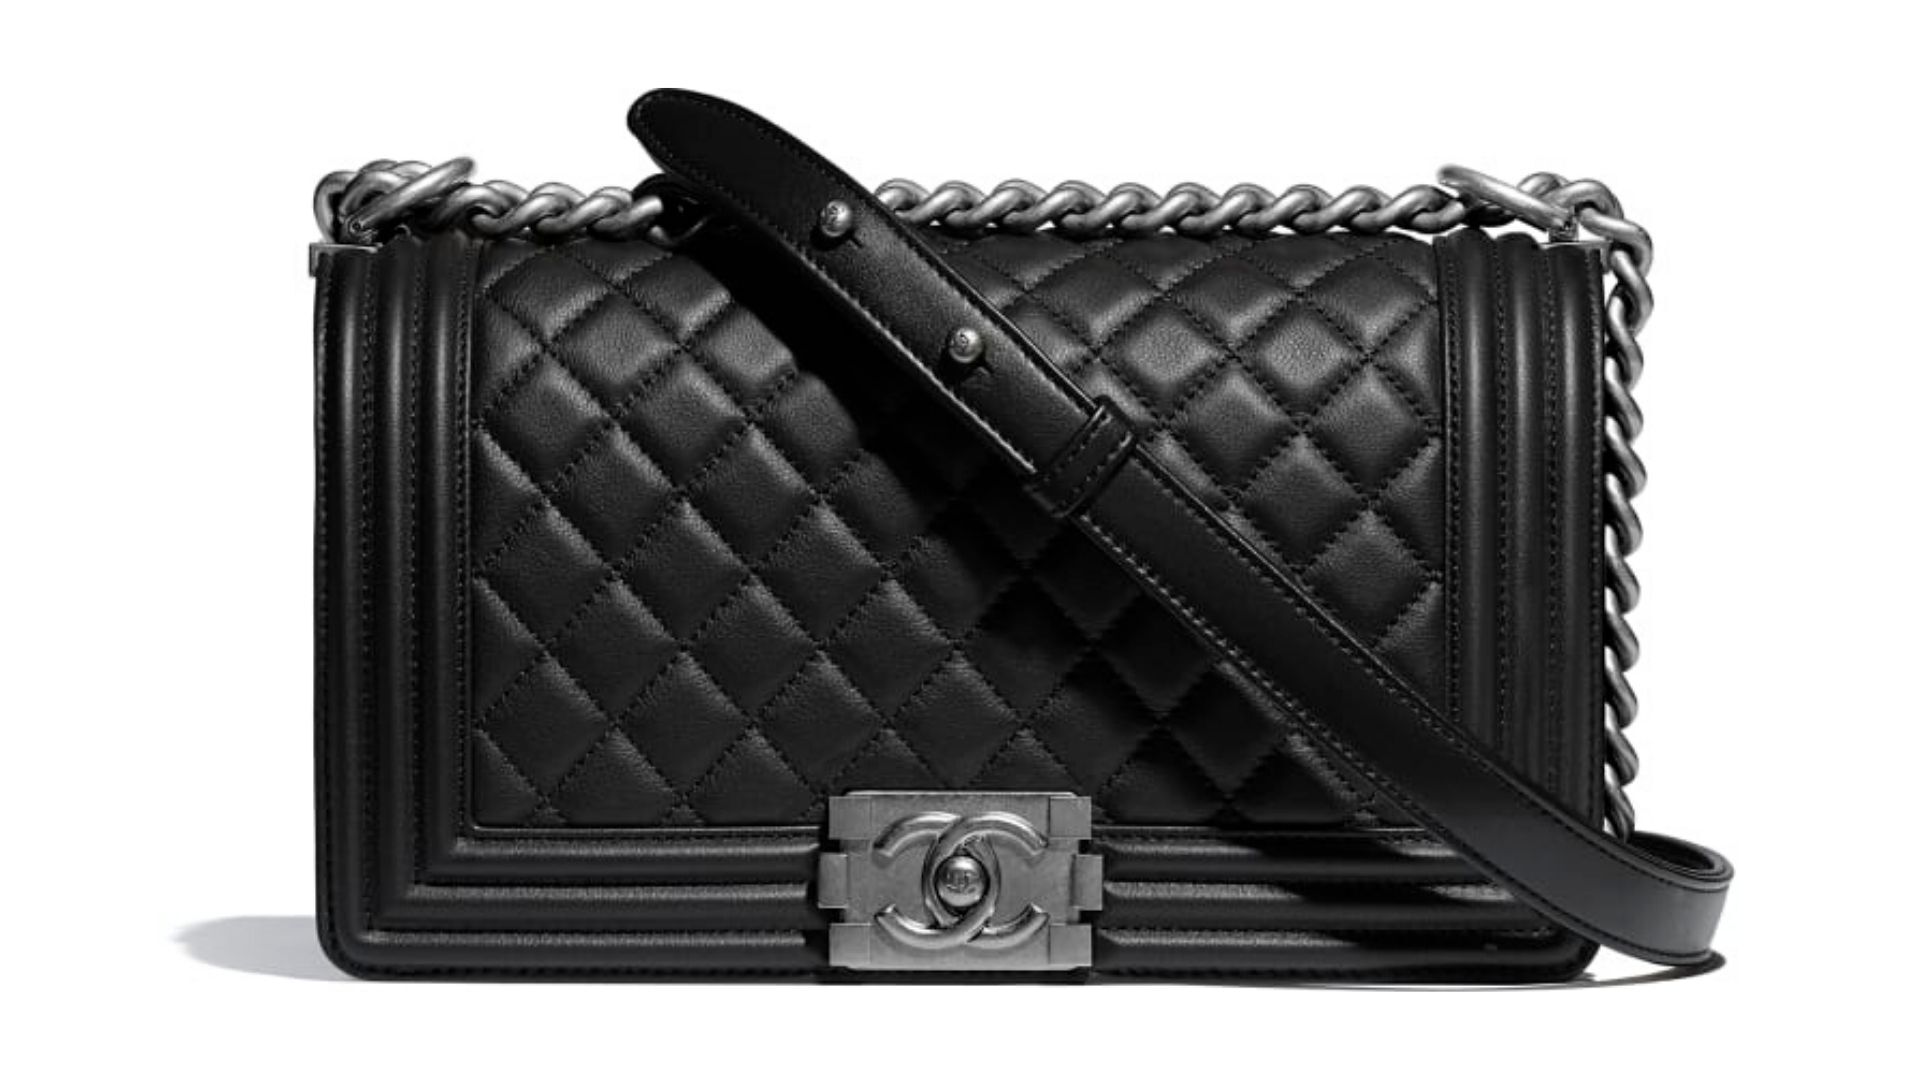 CHANEL 19 Bag: 10 Things To Know About This New Bag - BAGAHOLICBOY